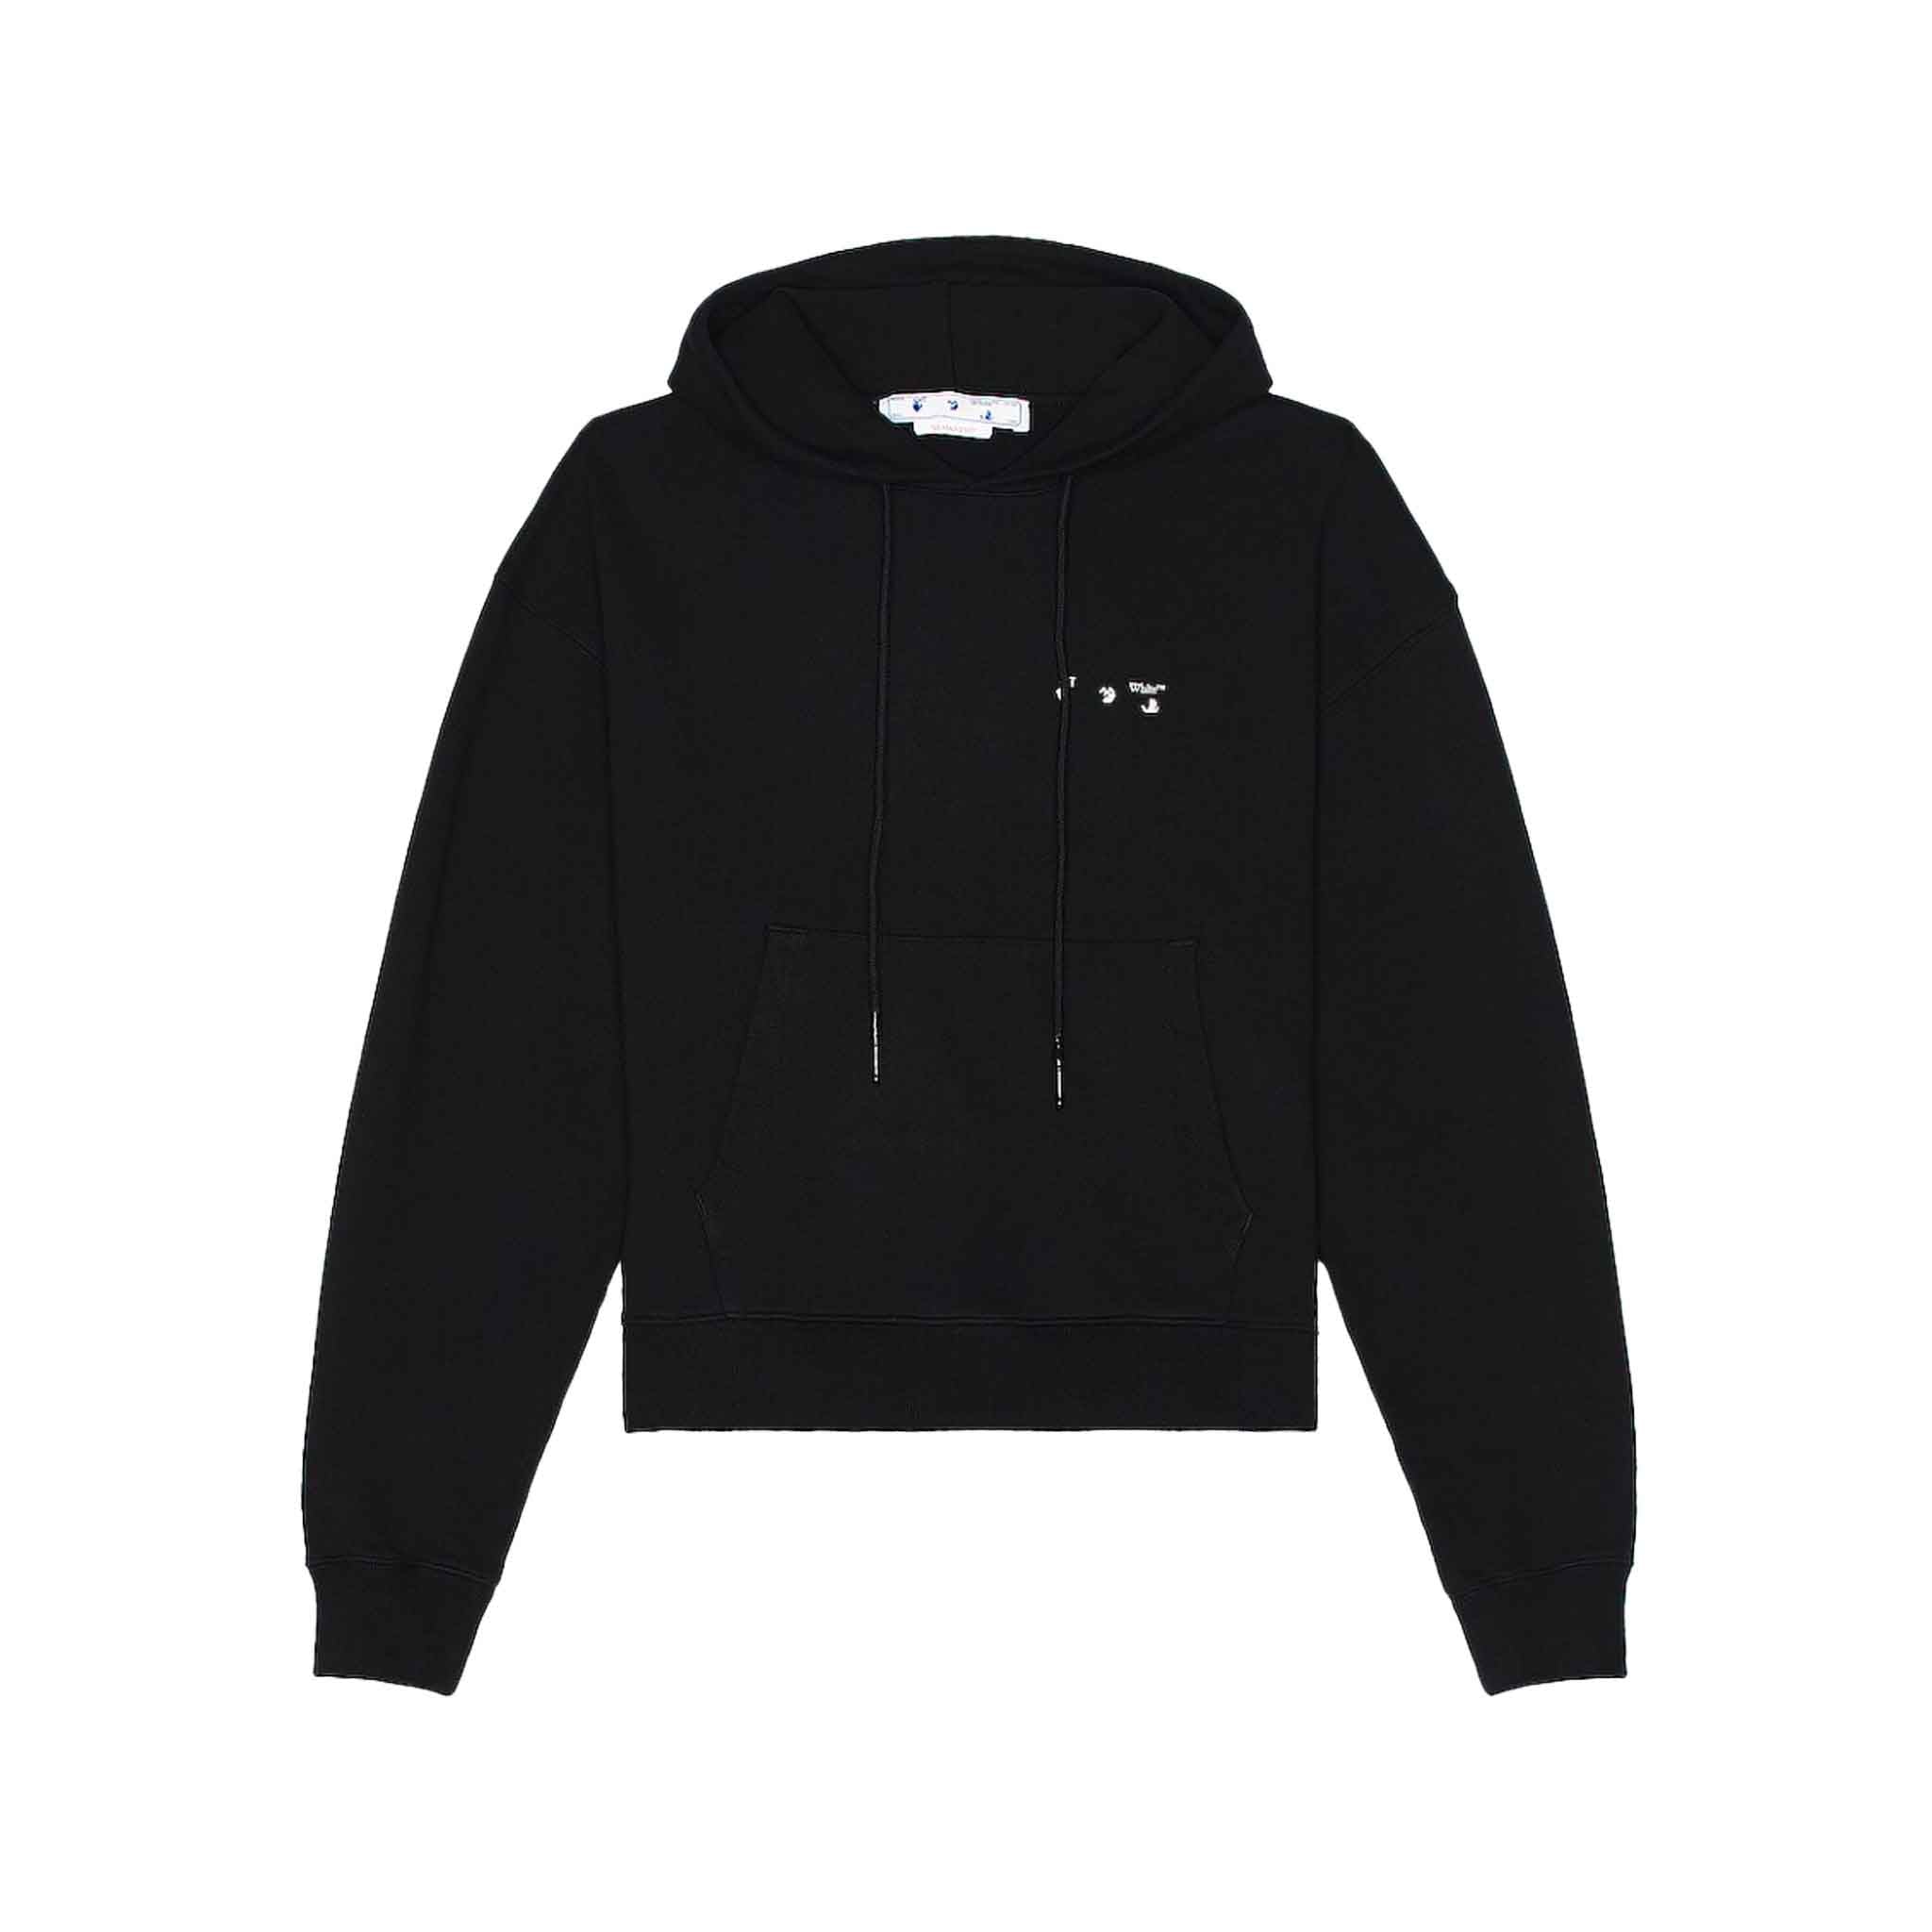 OFF-WHITE Caravaggio Paint Oversized Hoodie in Black